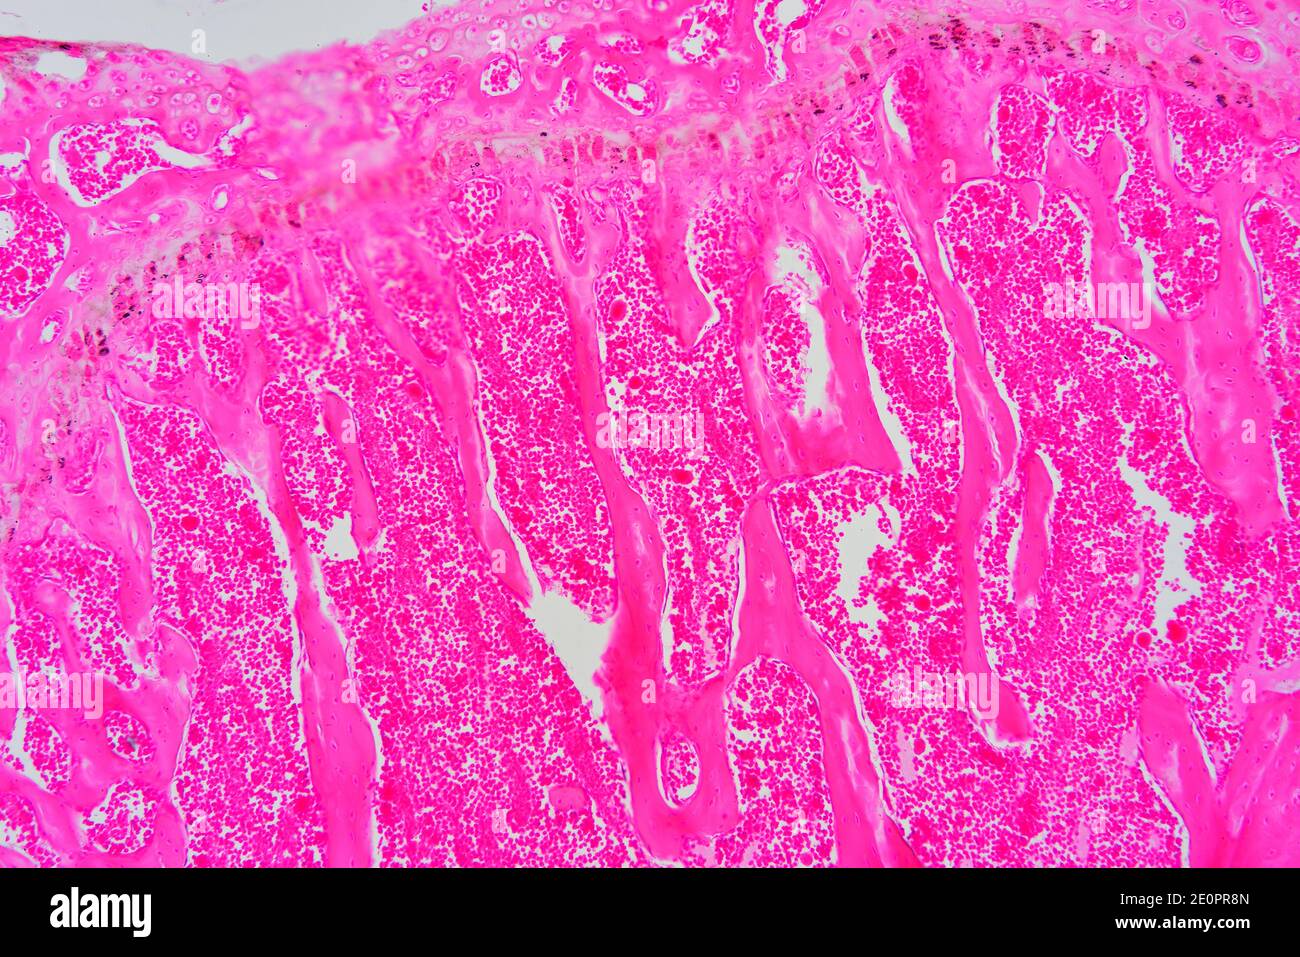 Human dense regular connective tissue. X75 at 10 cm wide. Stock Photo